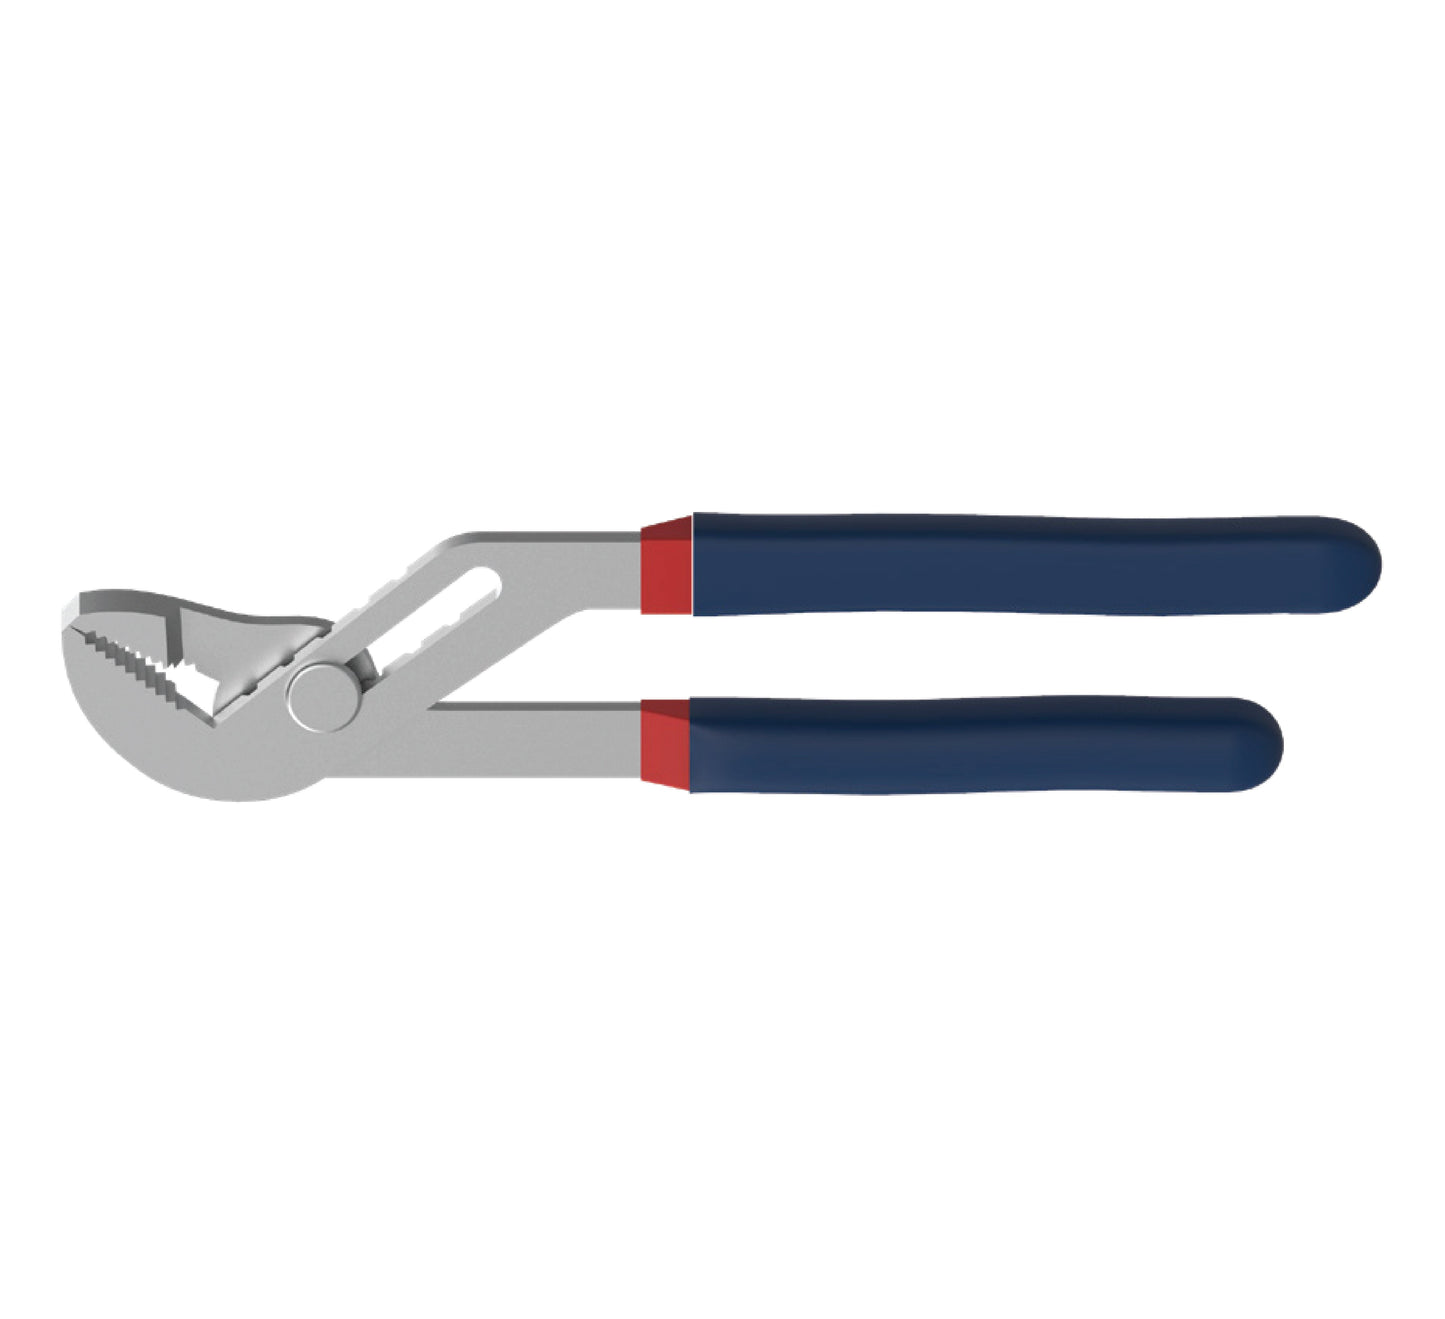 APT GROOVE JOINT PLIER A3 10" POLISH/ RED BLUE HANDLE-NEW APT PP CARD WITH RED STRAP AH1233240-10